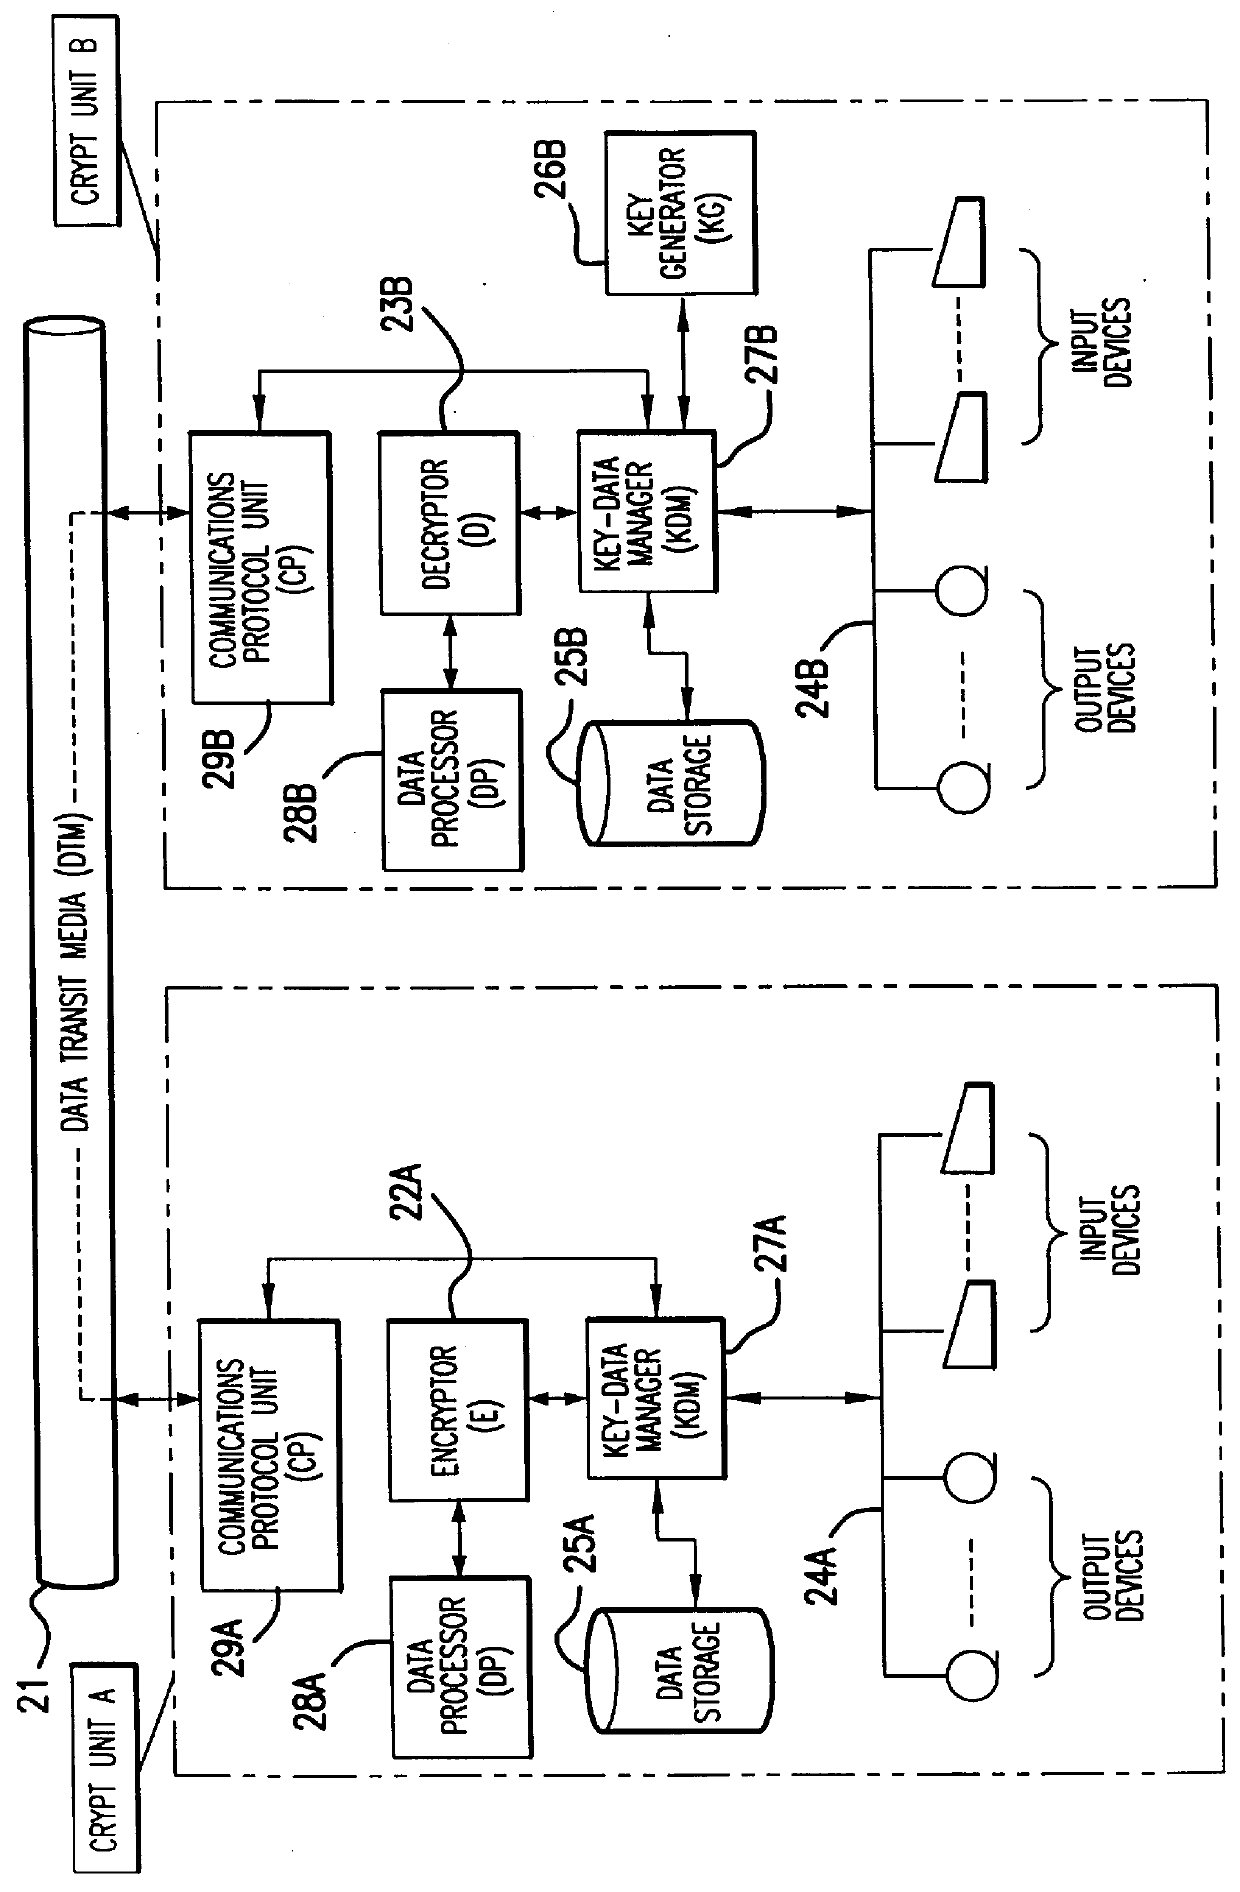 Method and apparatus for a robust high-speed cryptosystem